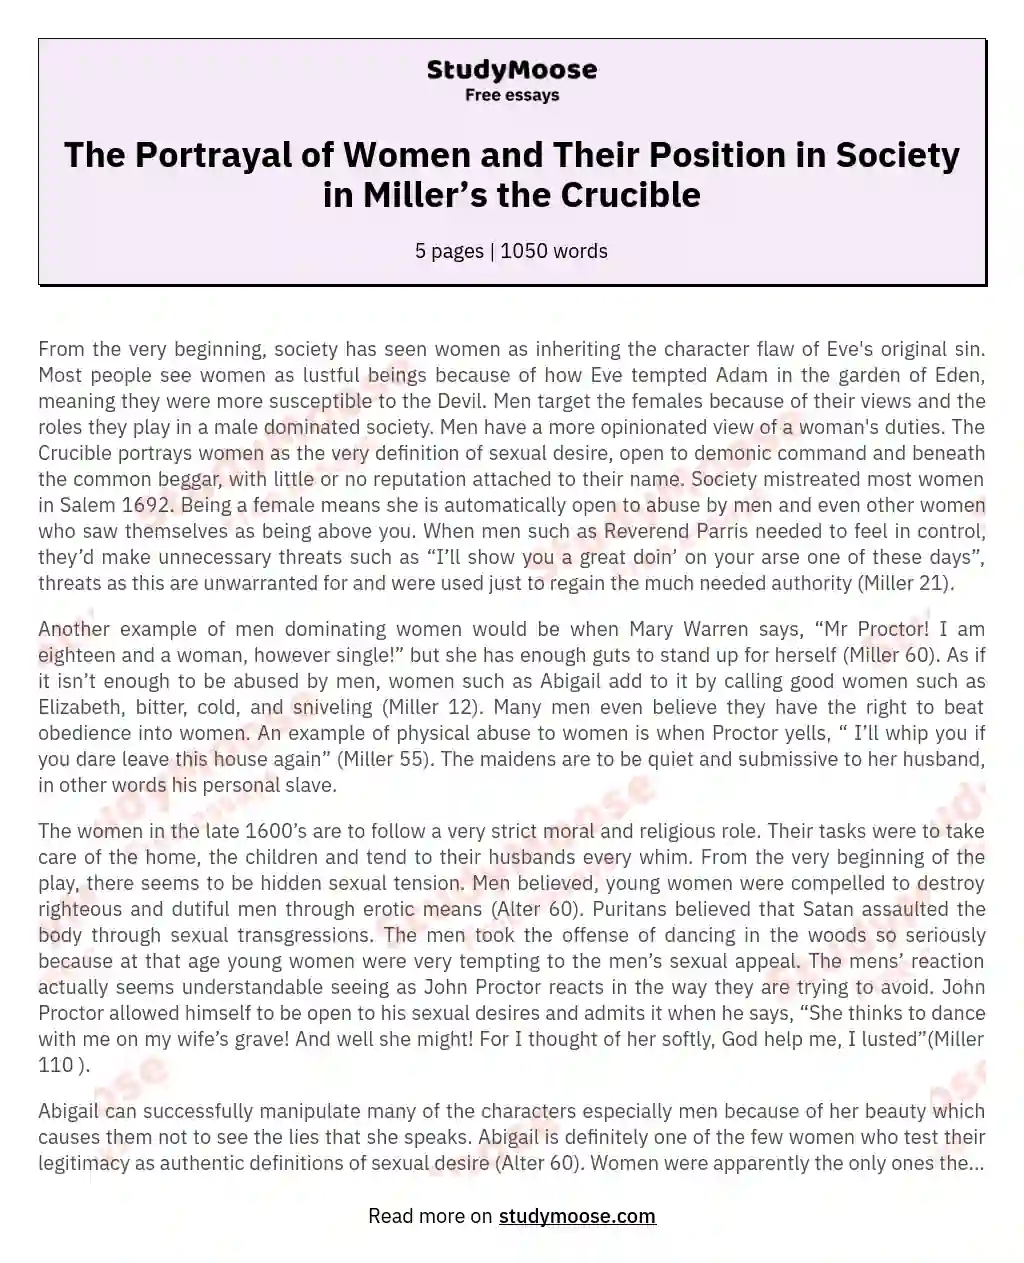 The Portrayal of Women and Their Position in Society in Miller’s the Crucible essay